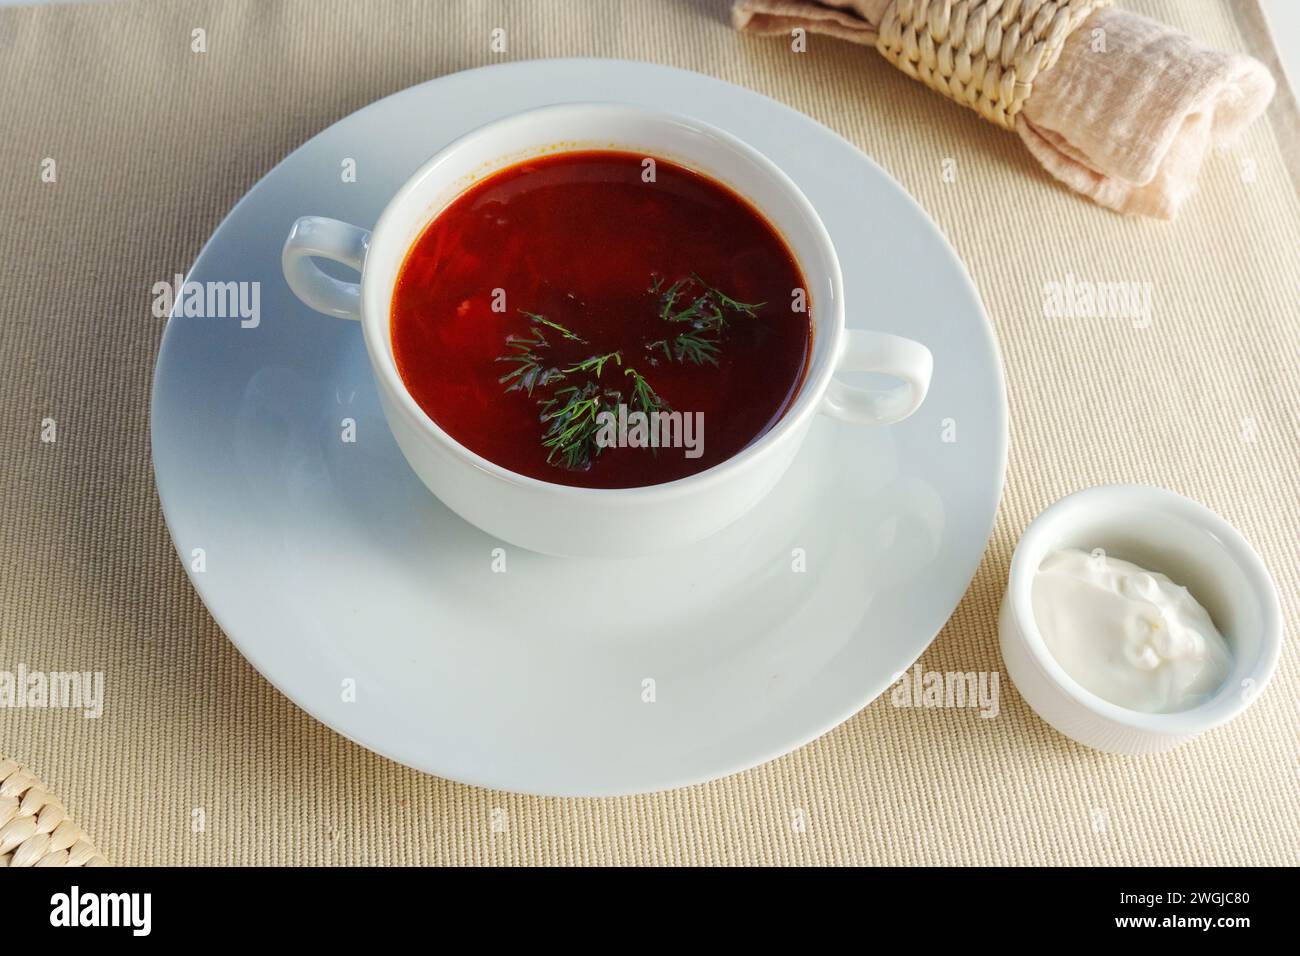 Serenity in a Bowl: Captivating Creamy Tomato Bisque Served With a Gleaming Silver Spoon Stock Photo